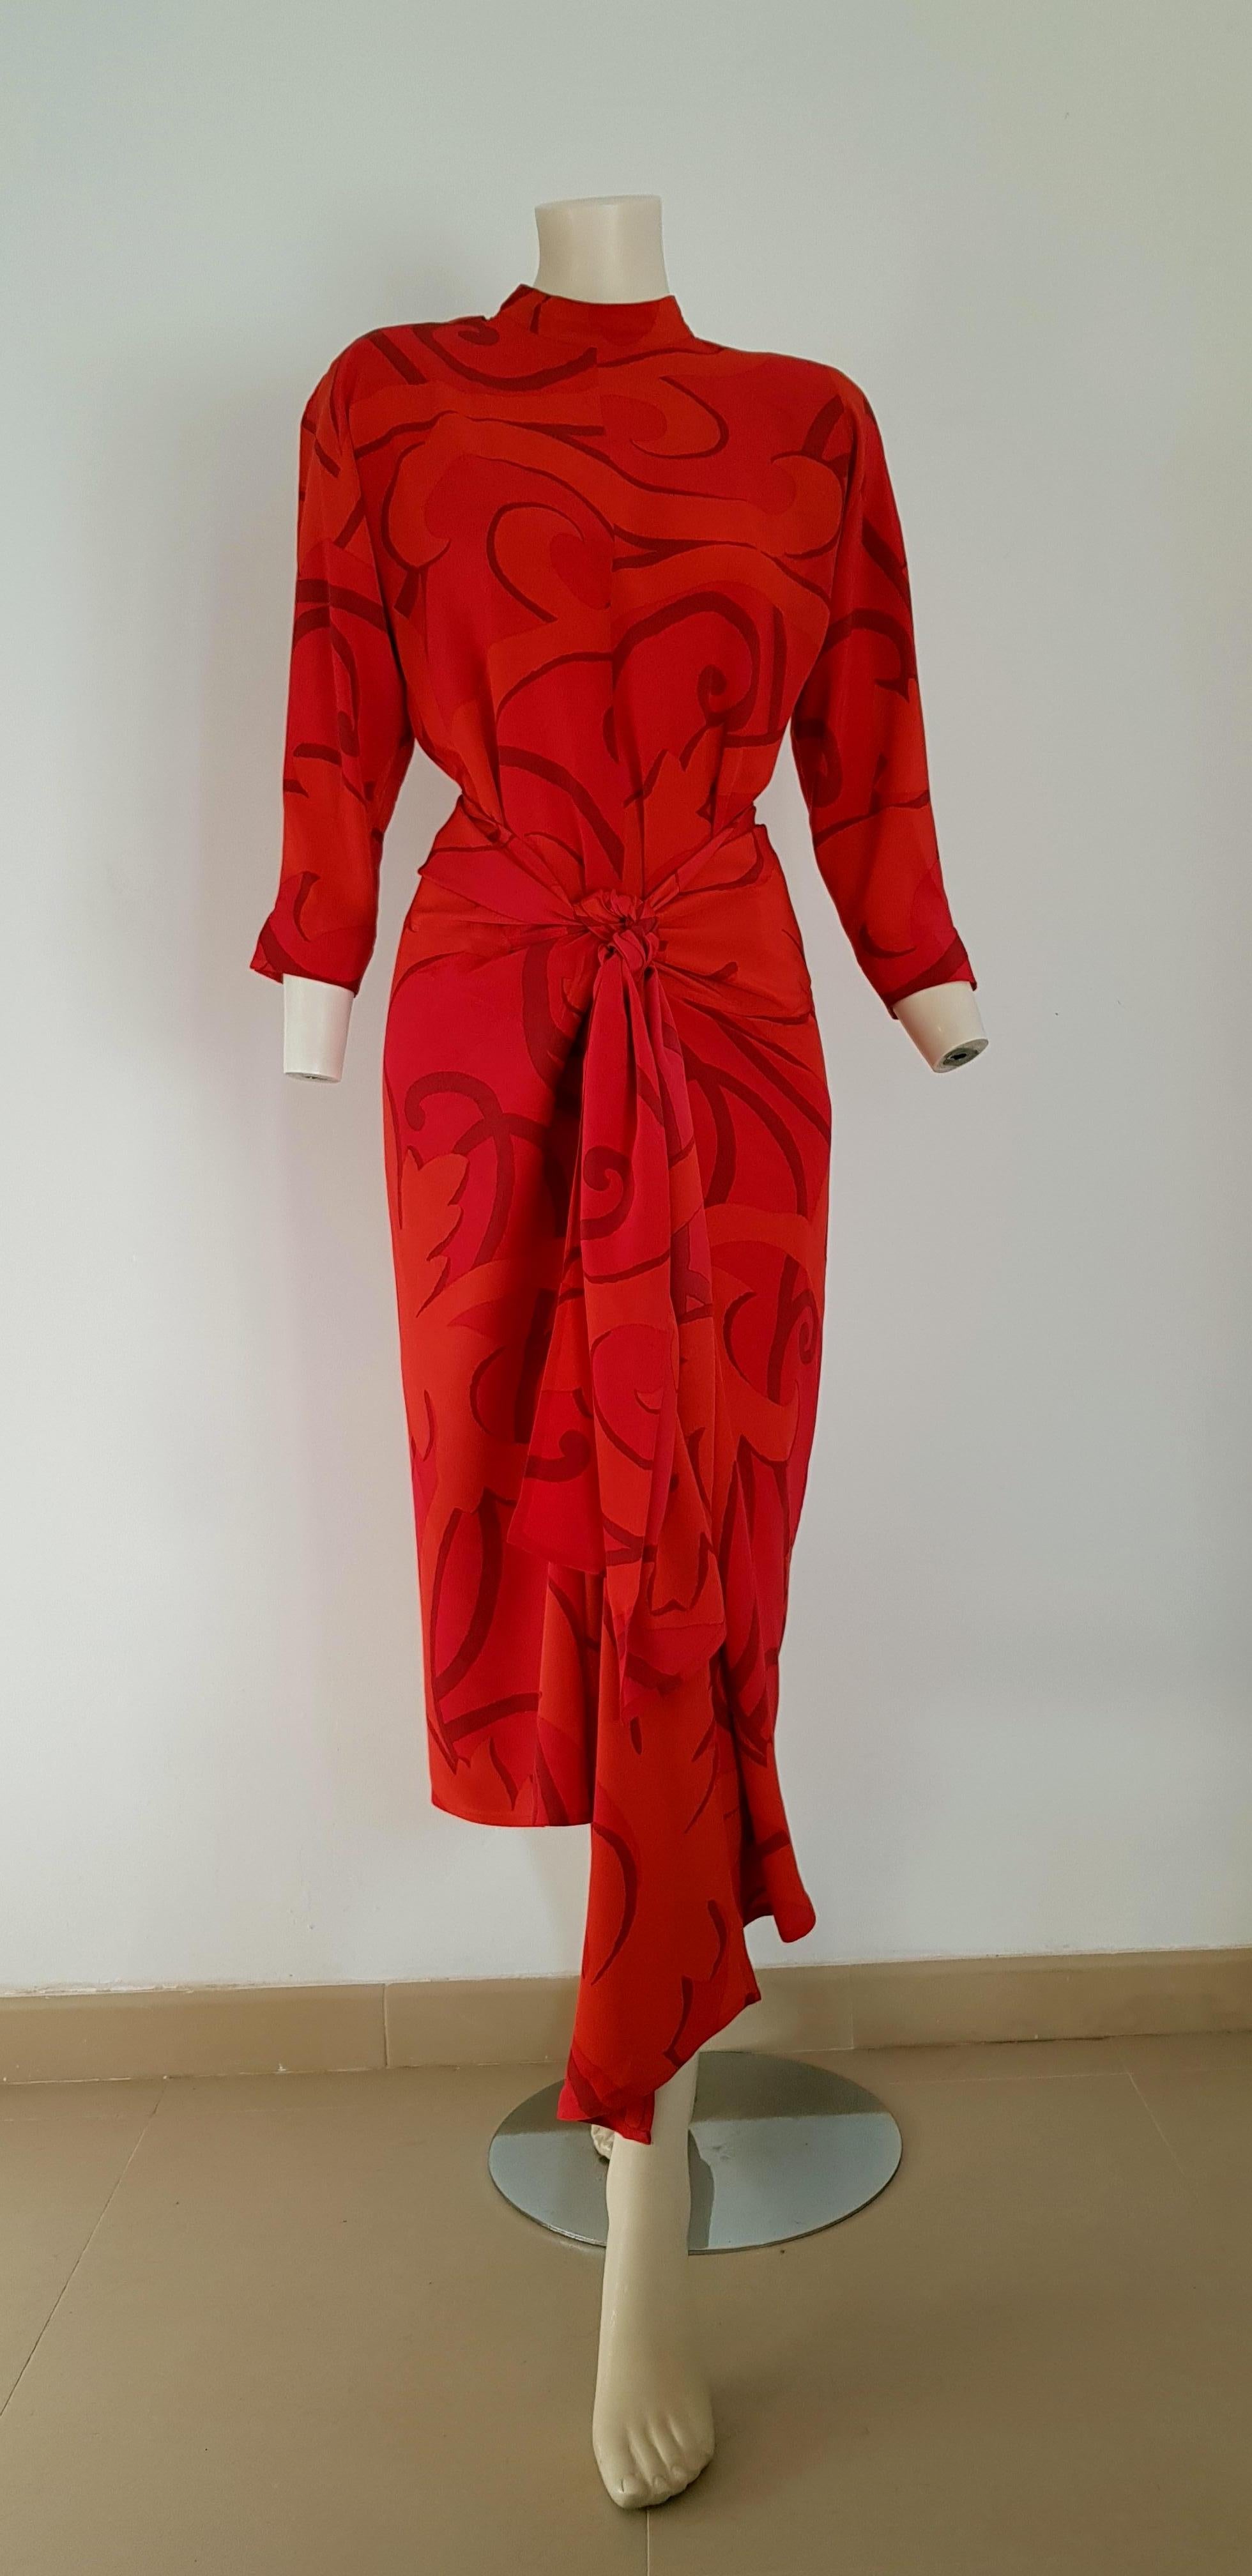 Gianfranco FERRÉ Couture Red Silk Dress with Skirt-foulard - Unworn 

SIZE: equivalent to about Small / Medium, please review approx measurements as follows in cm: lenght 125, chest underarm to underarm 54, bust circumference 89, shoulder from seam